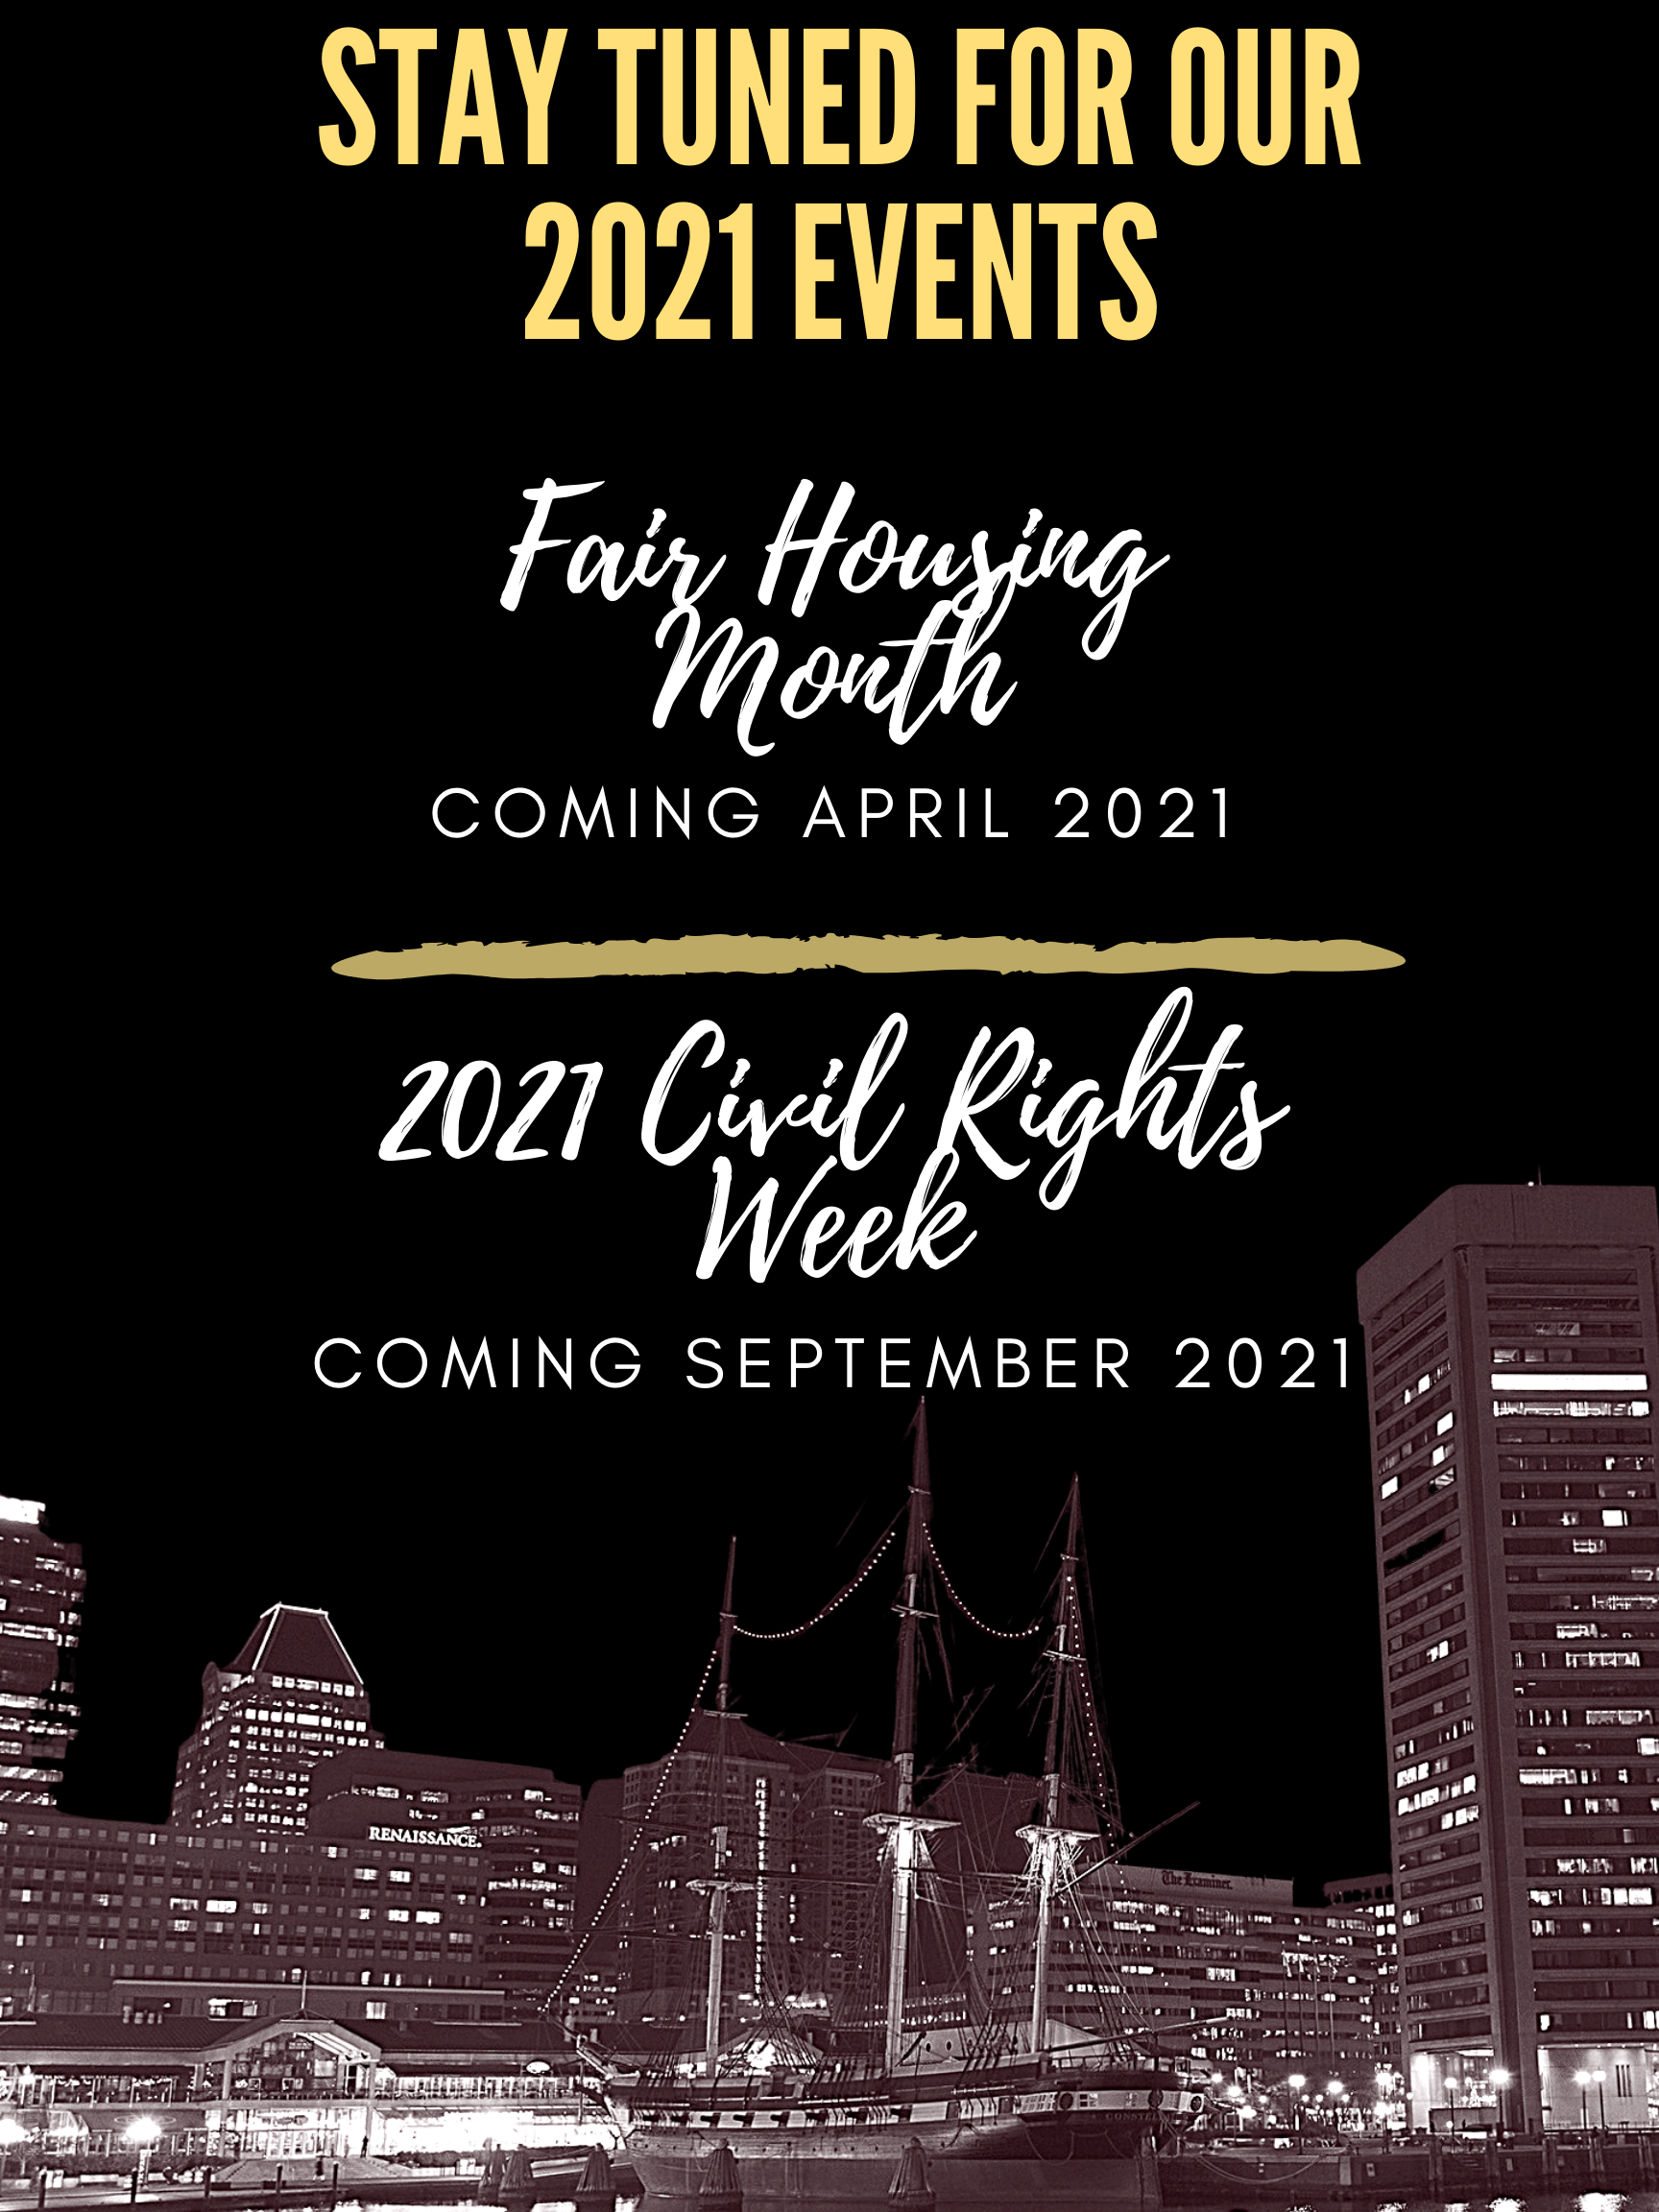 Stay Tuned for Our 2021 Events